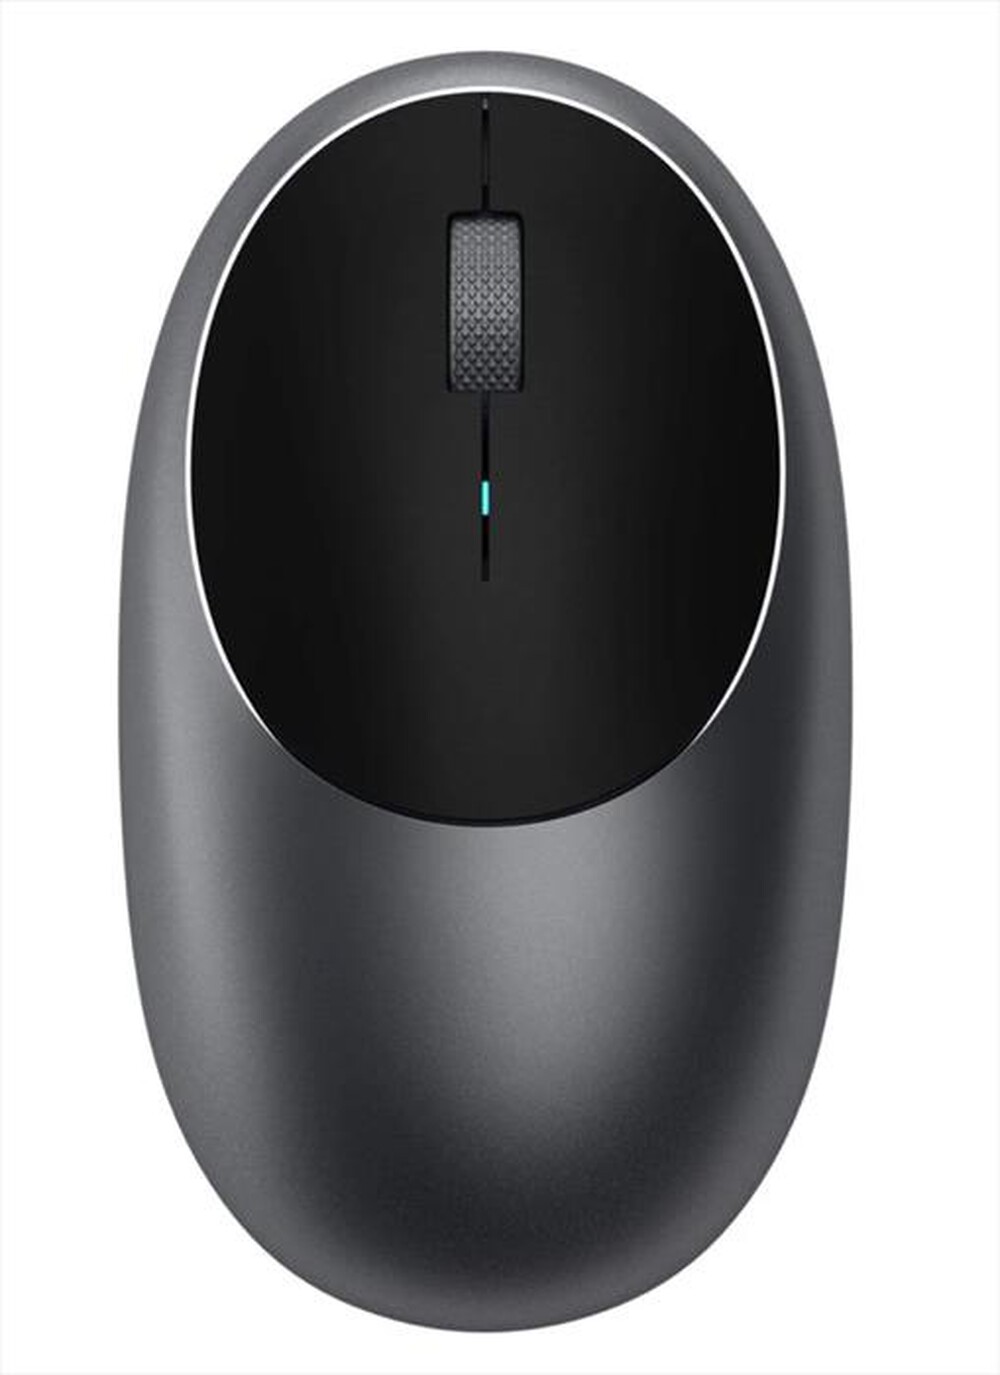 "SATECHI - MOUSE WIRELESS M1-space grey"